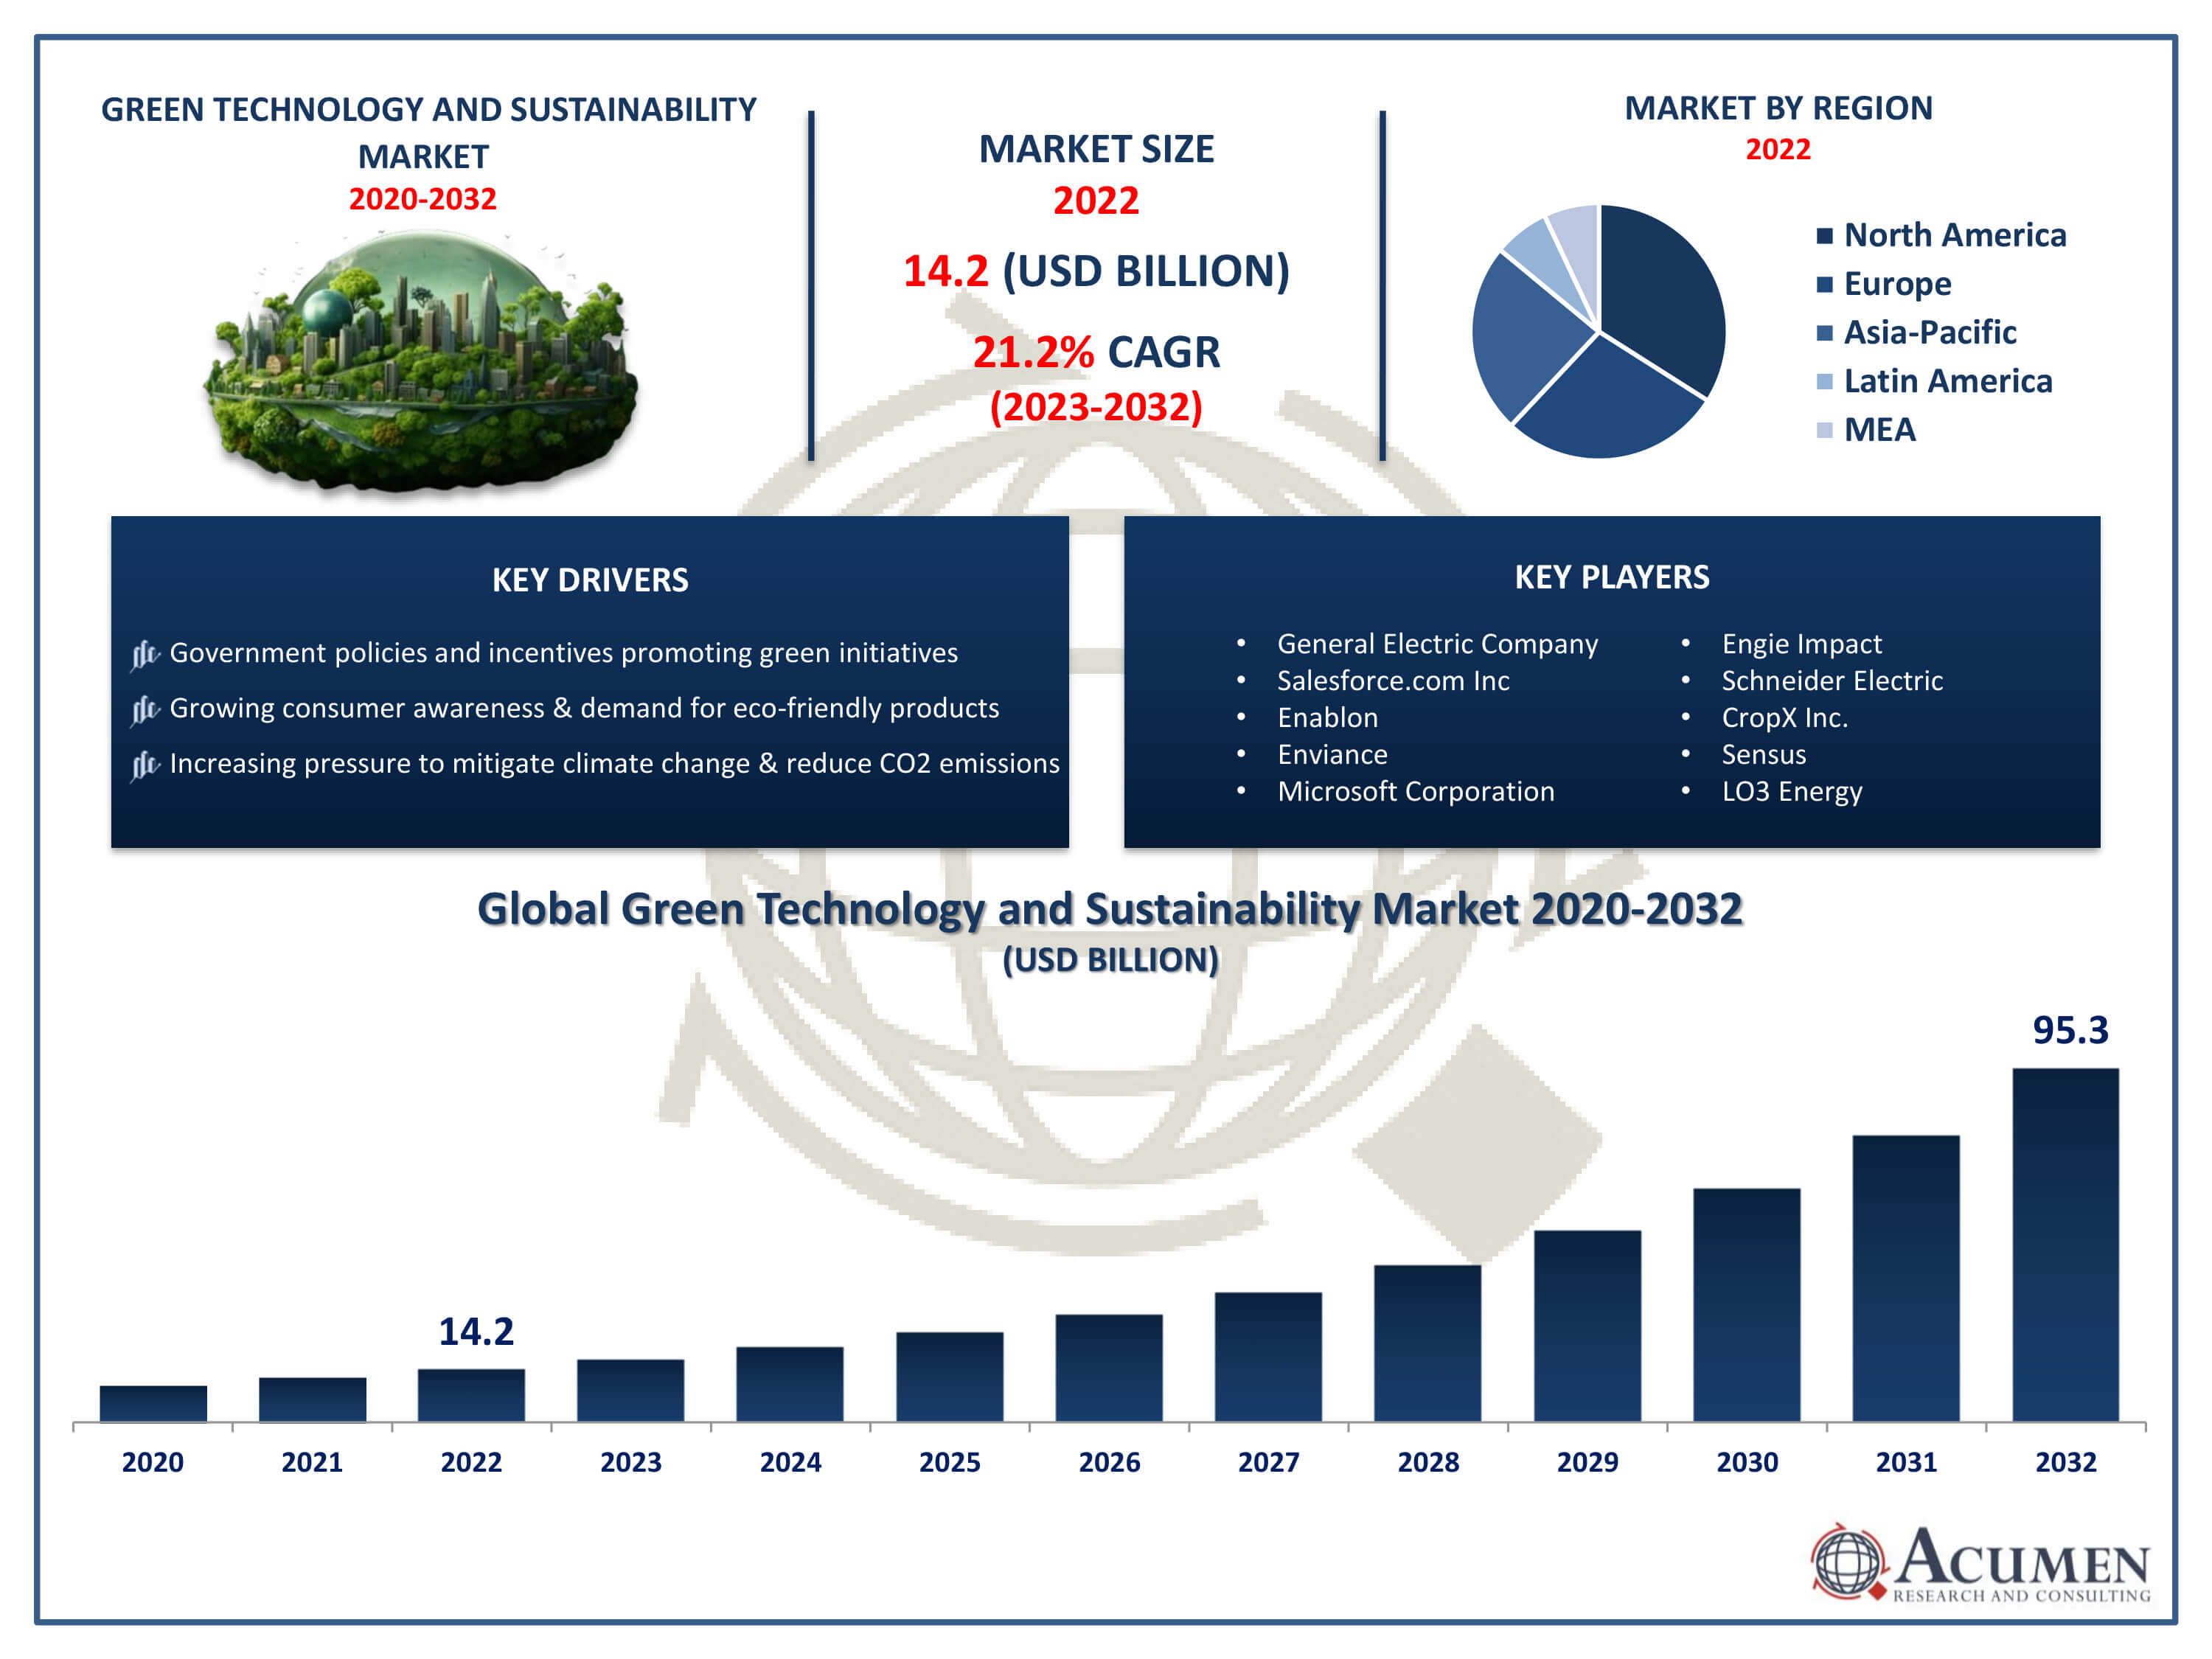 Green Technology and Sustainability Market Trends